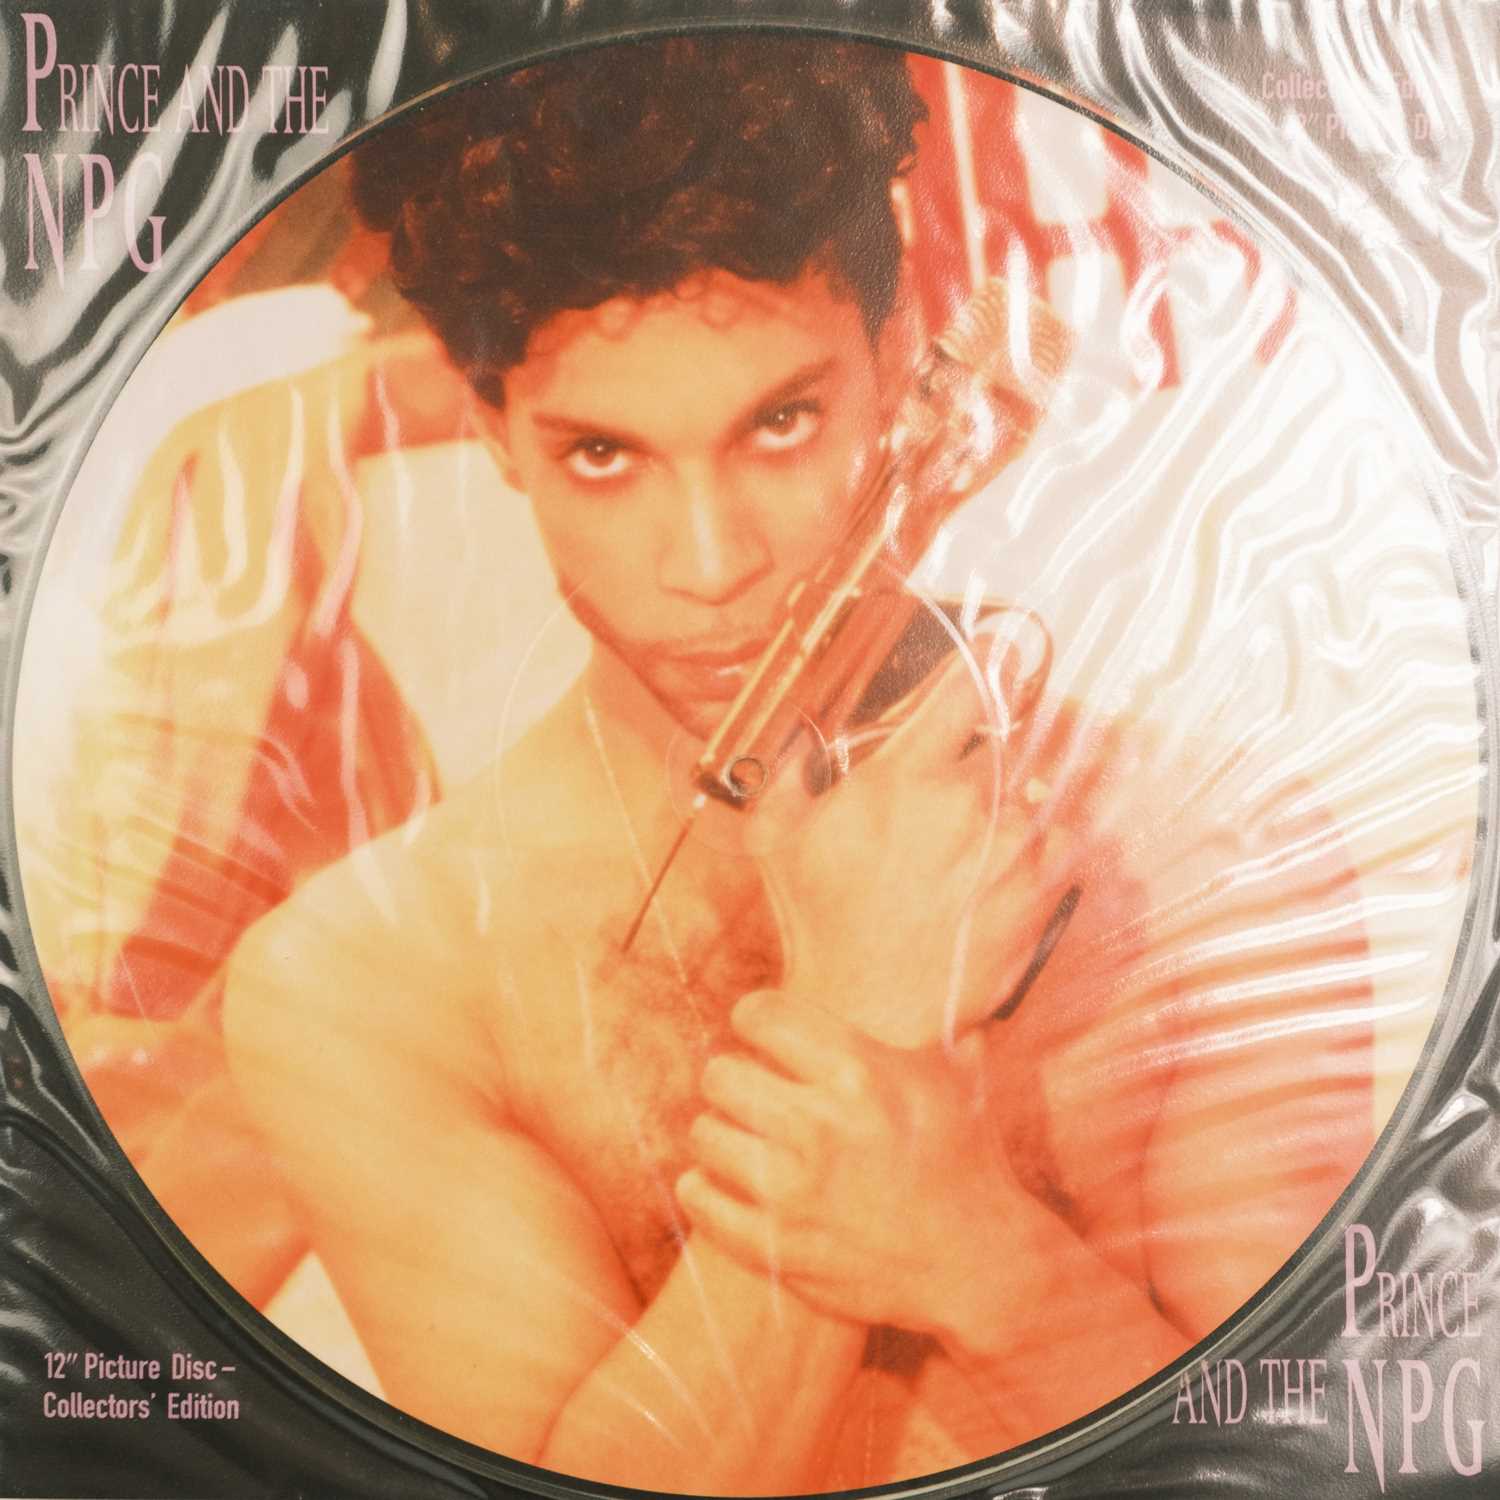 Prince 12" singles and picture discs. - Image 6 of 34